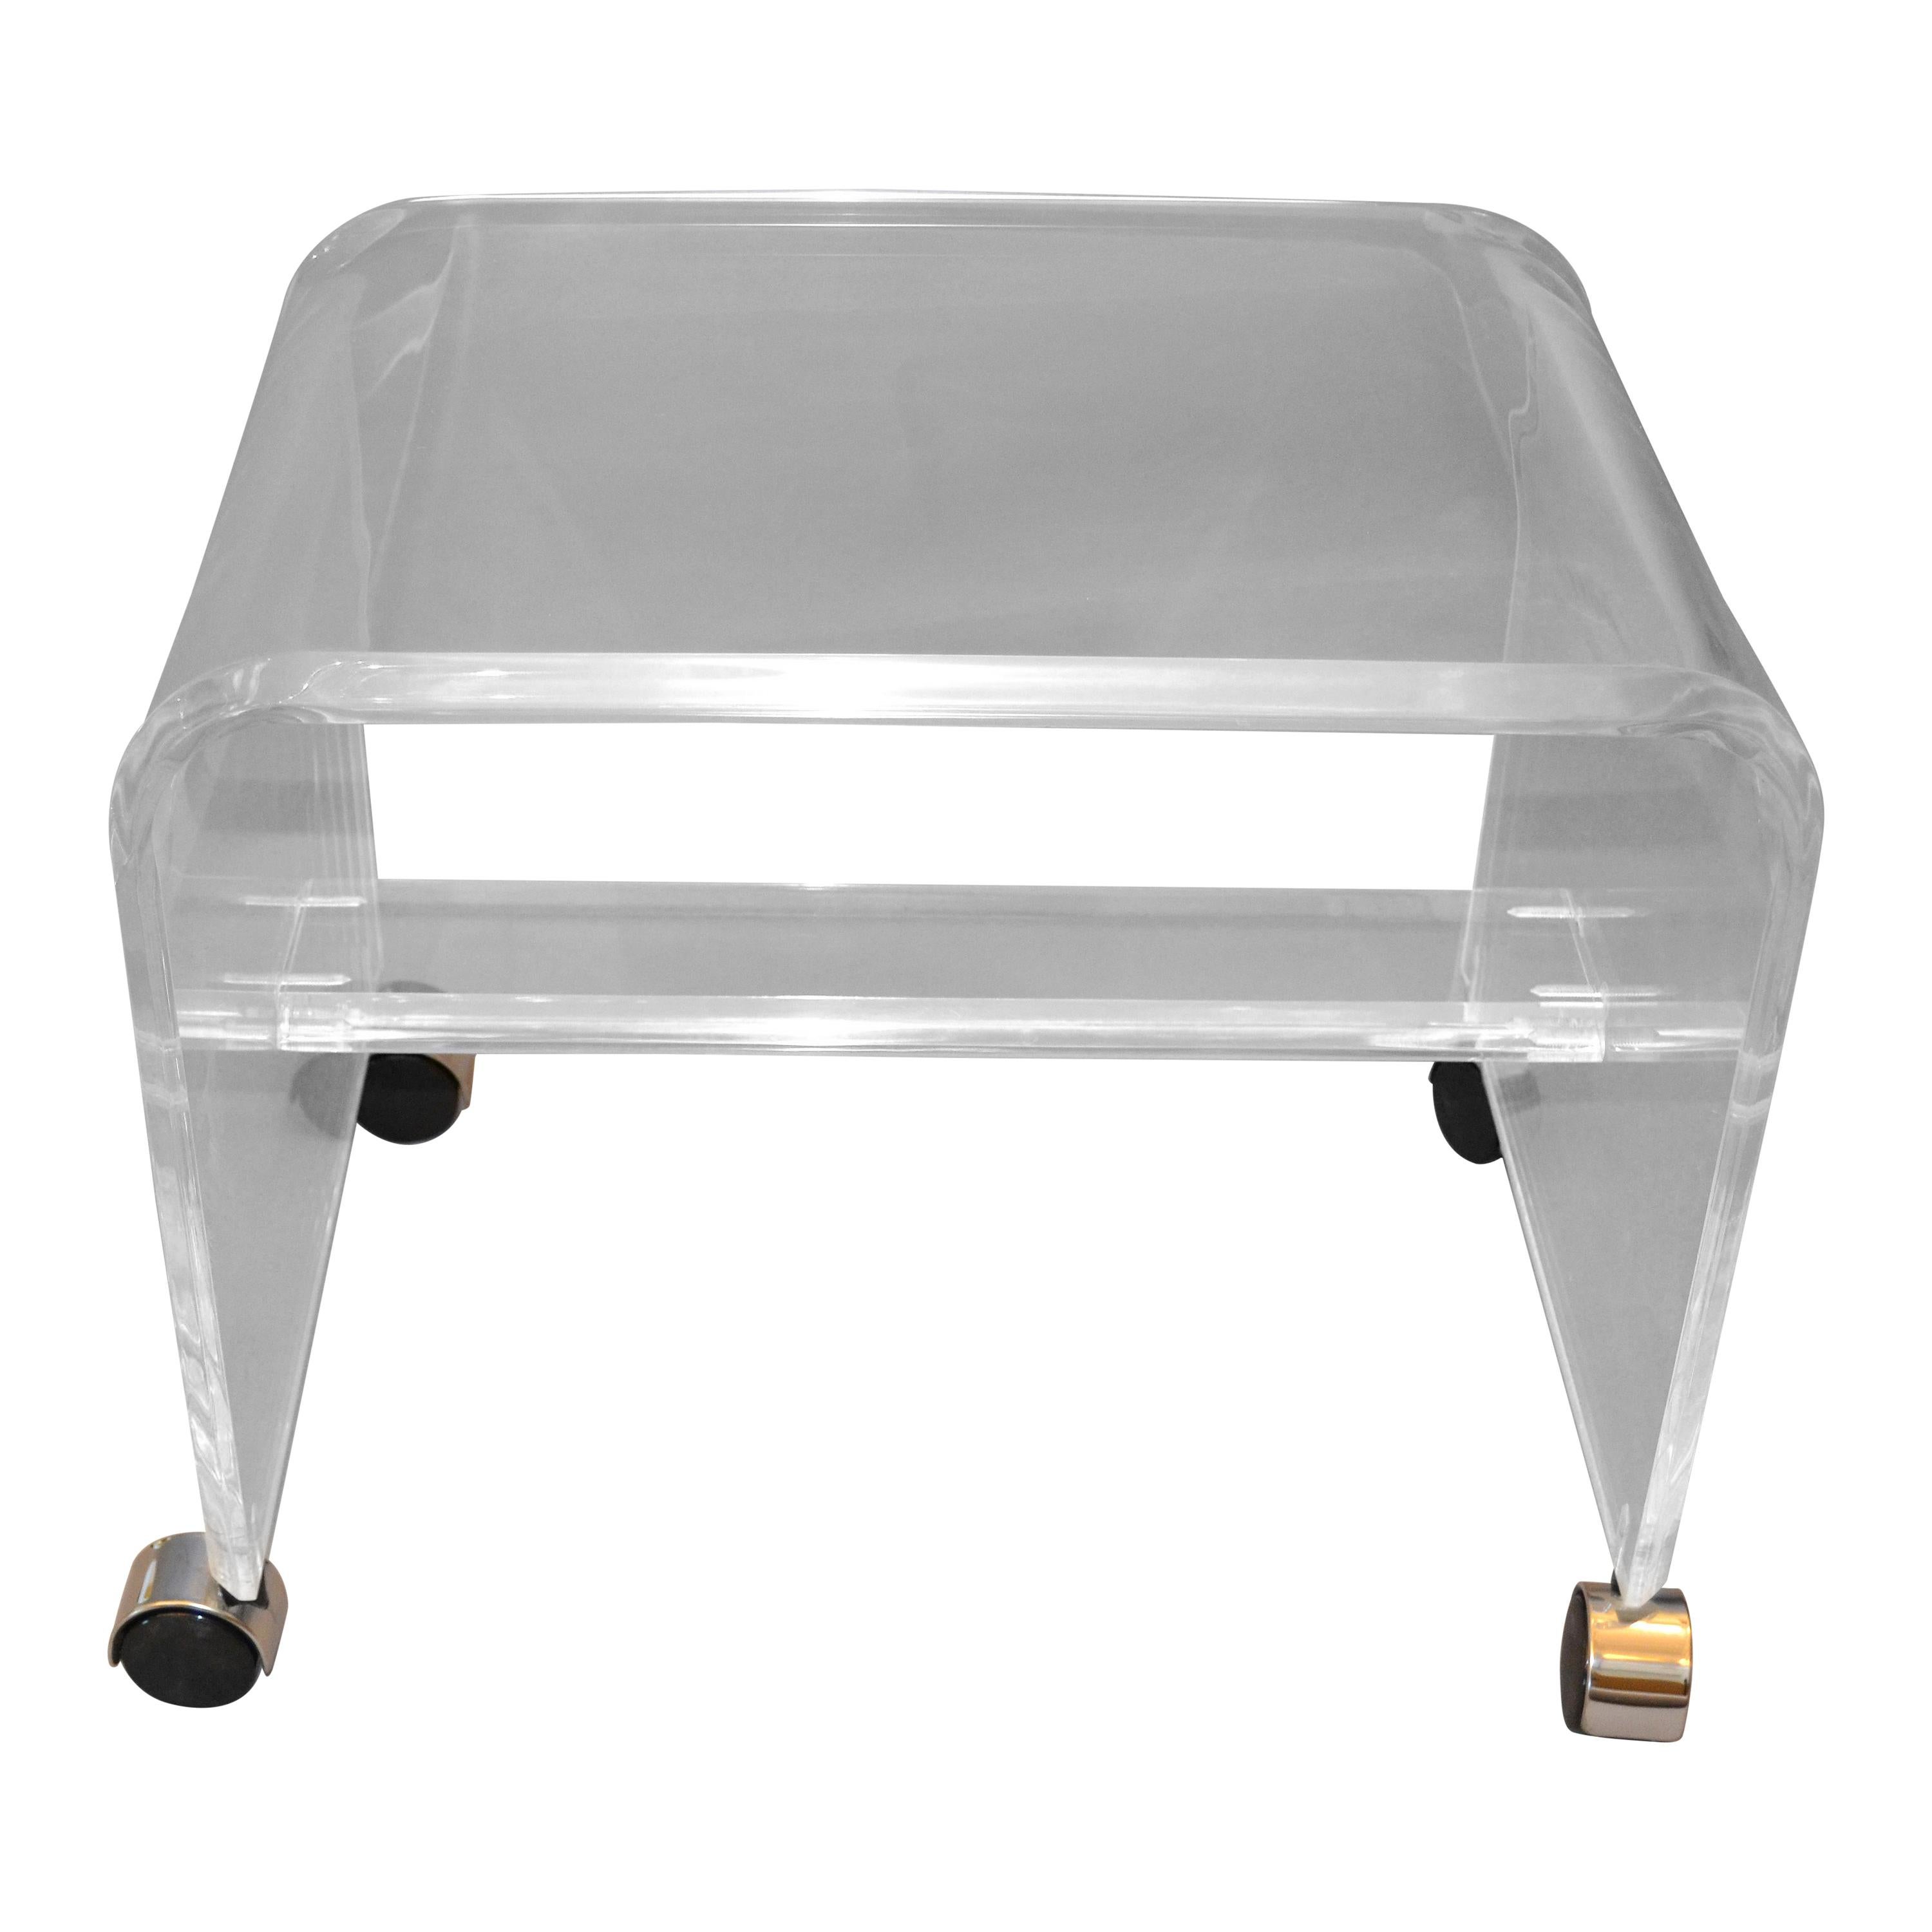 Mid-Century Modern Lucite or Acrylic Stool, Vanity Stool on Chrome Casters